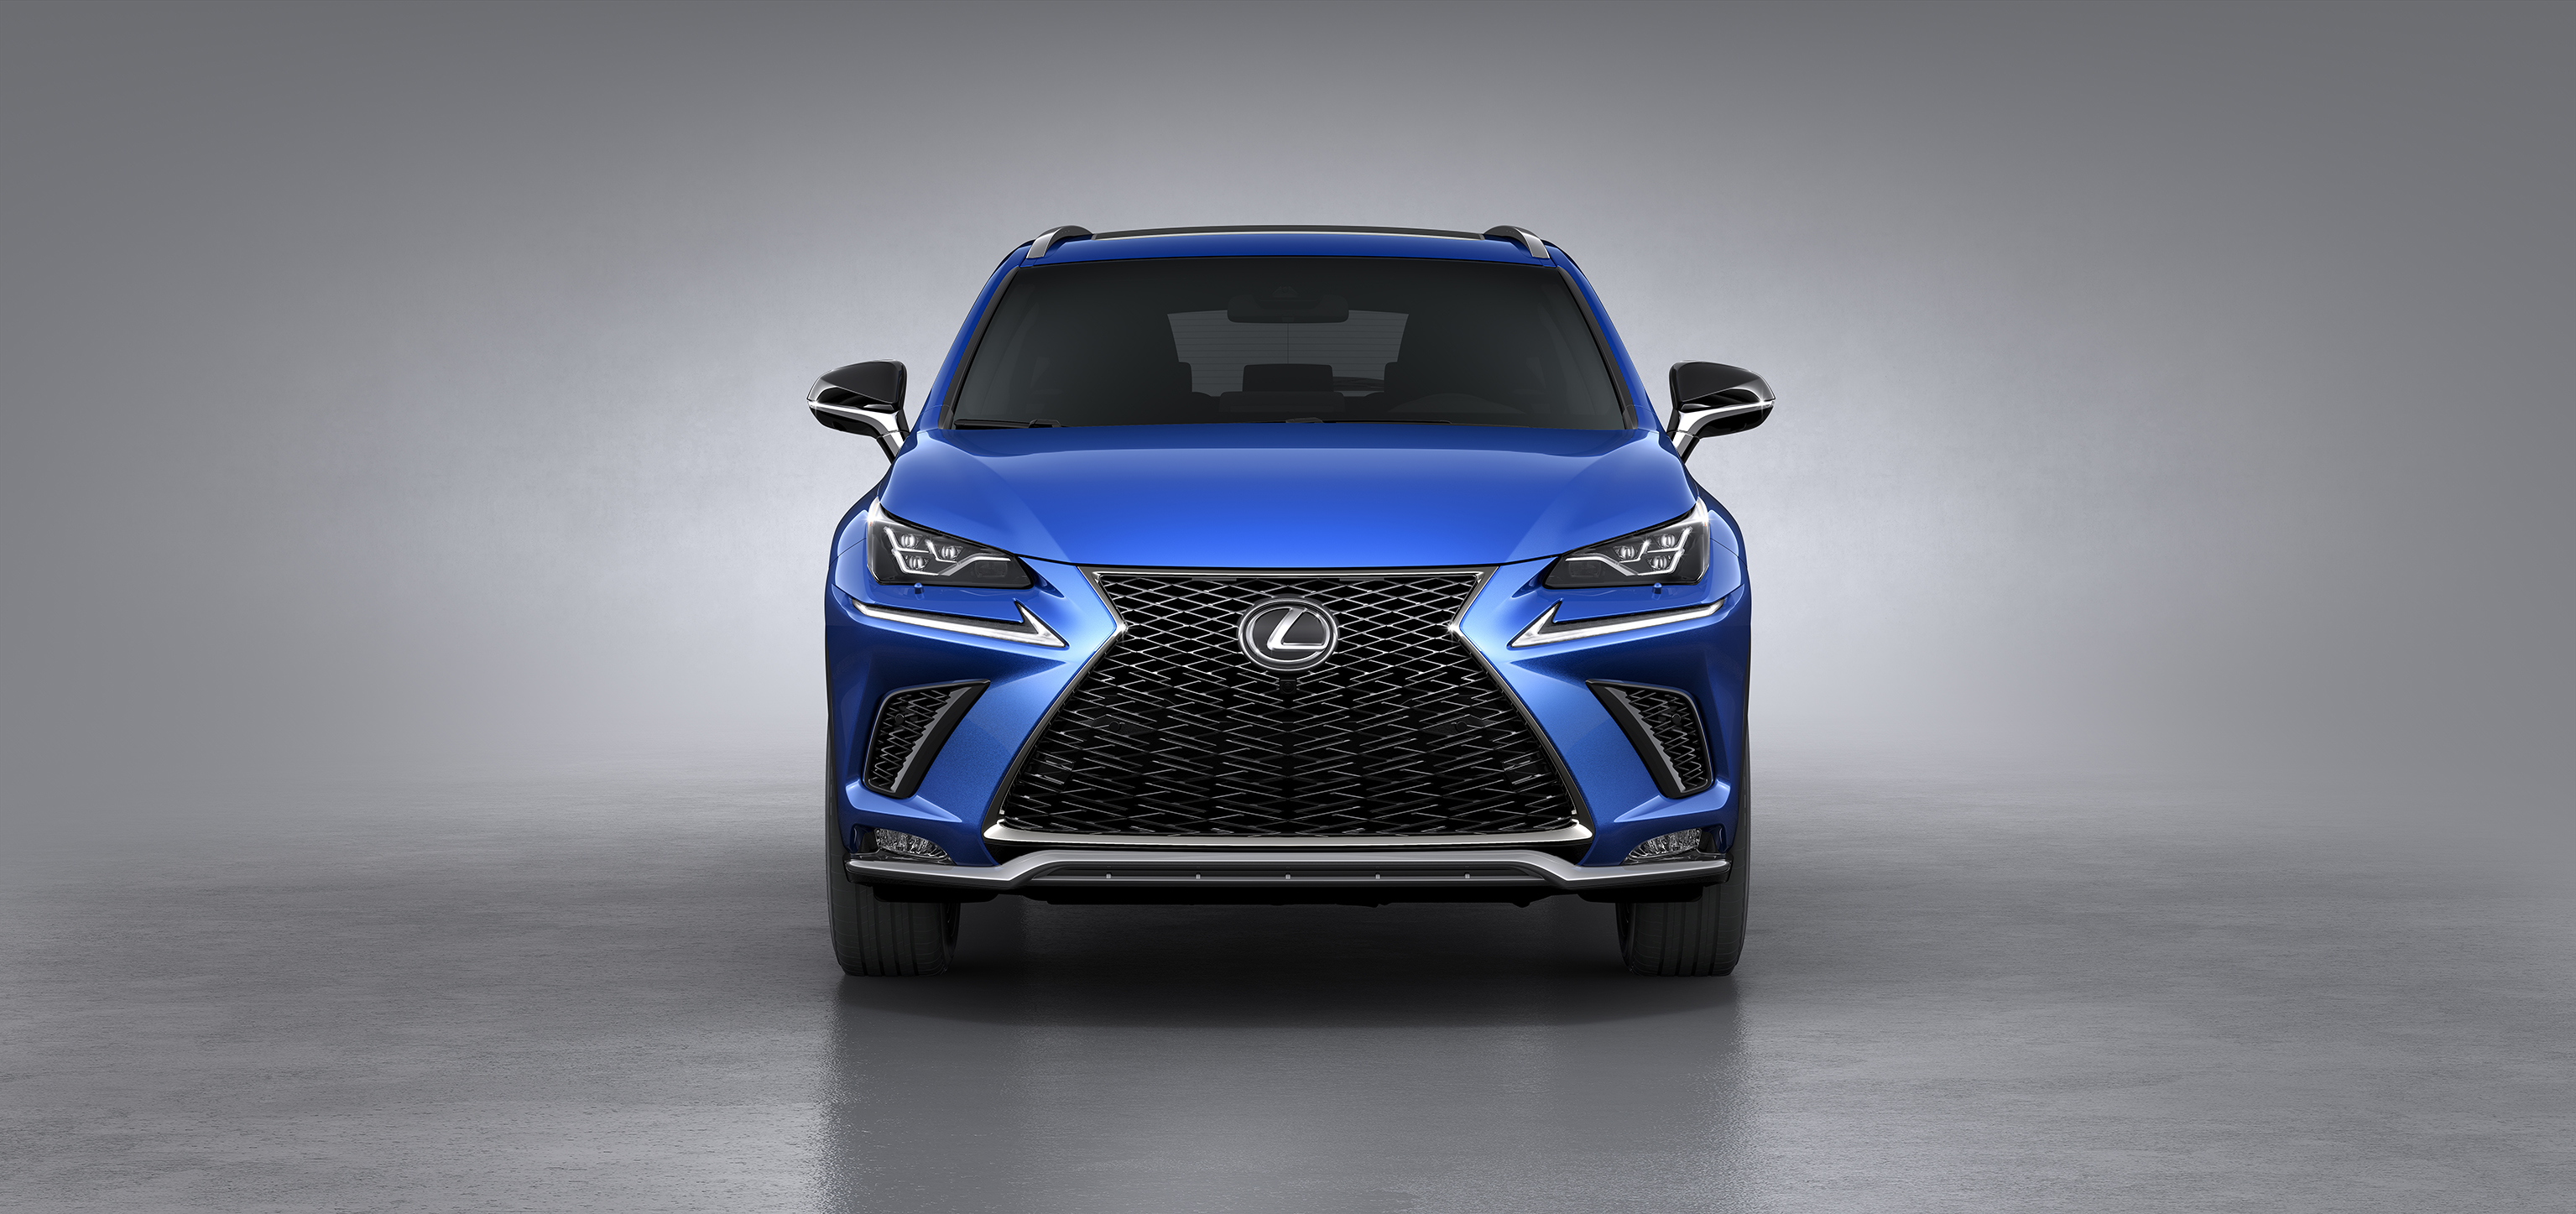 Lexus NX facelift debuts with active safety systems